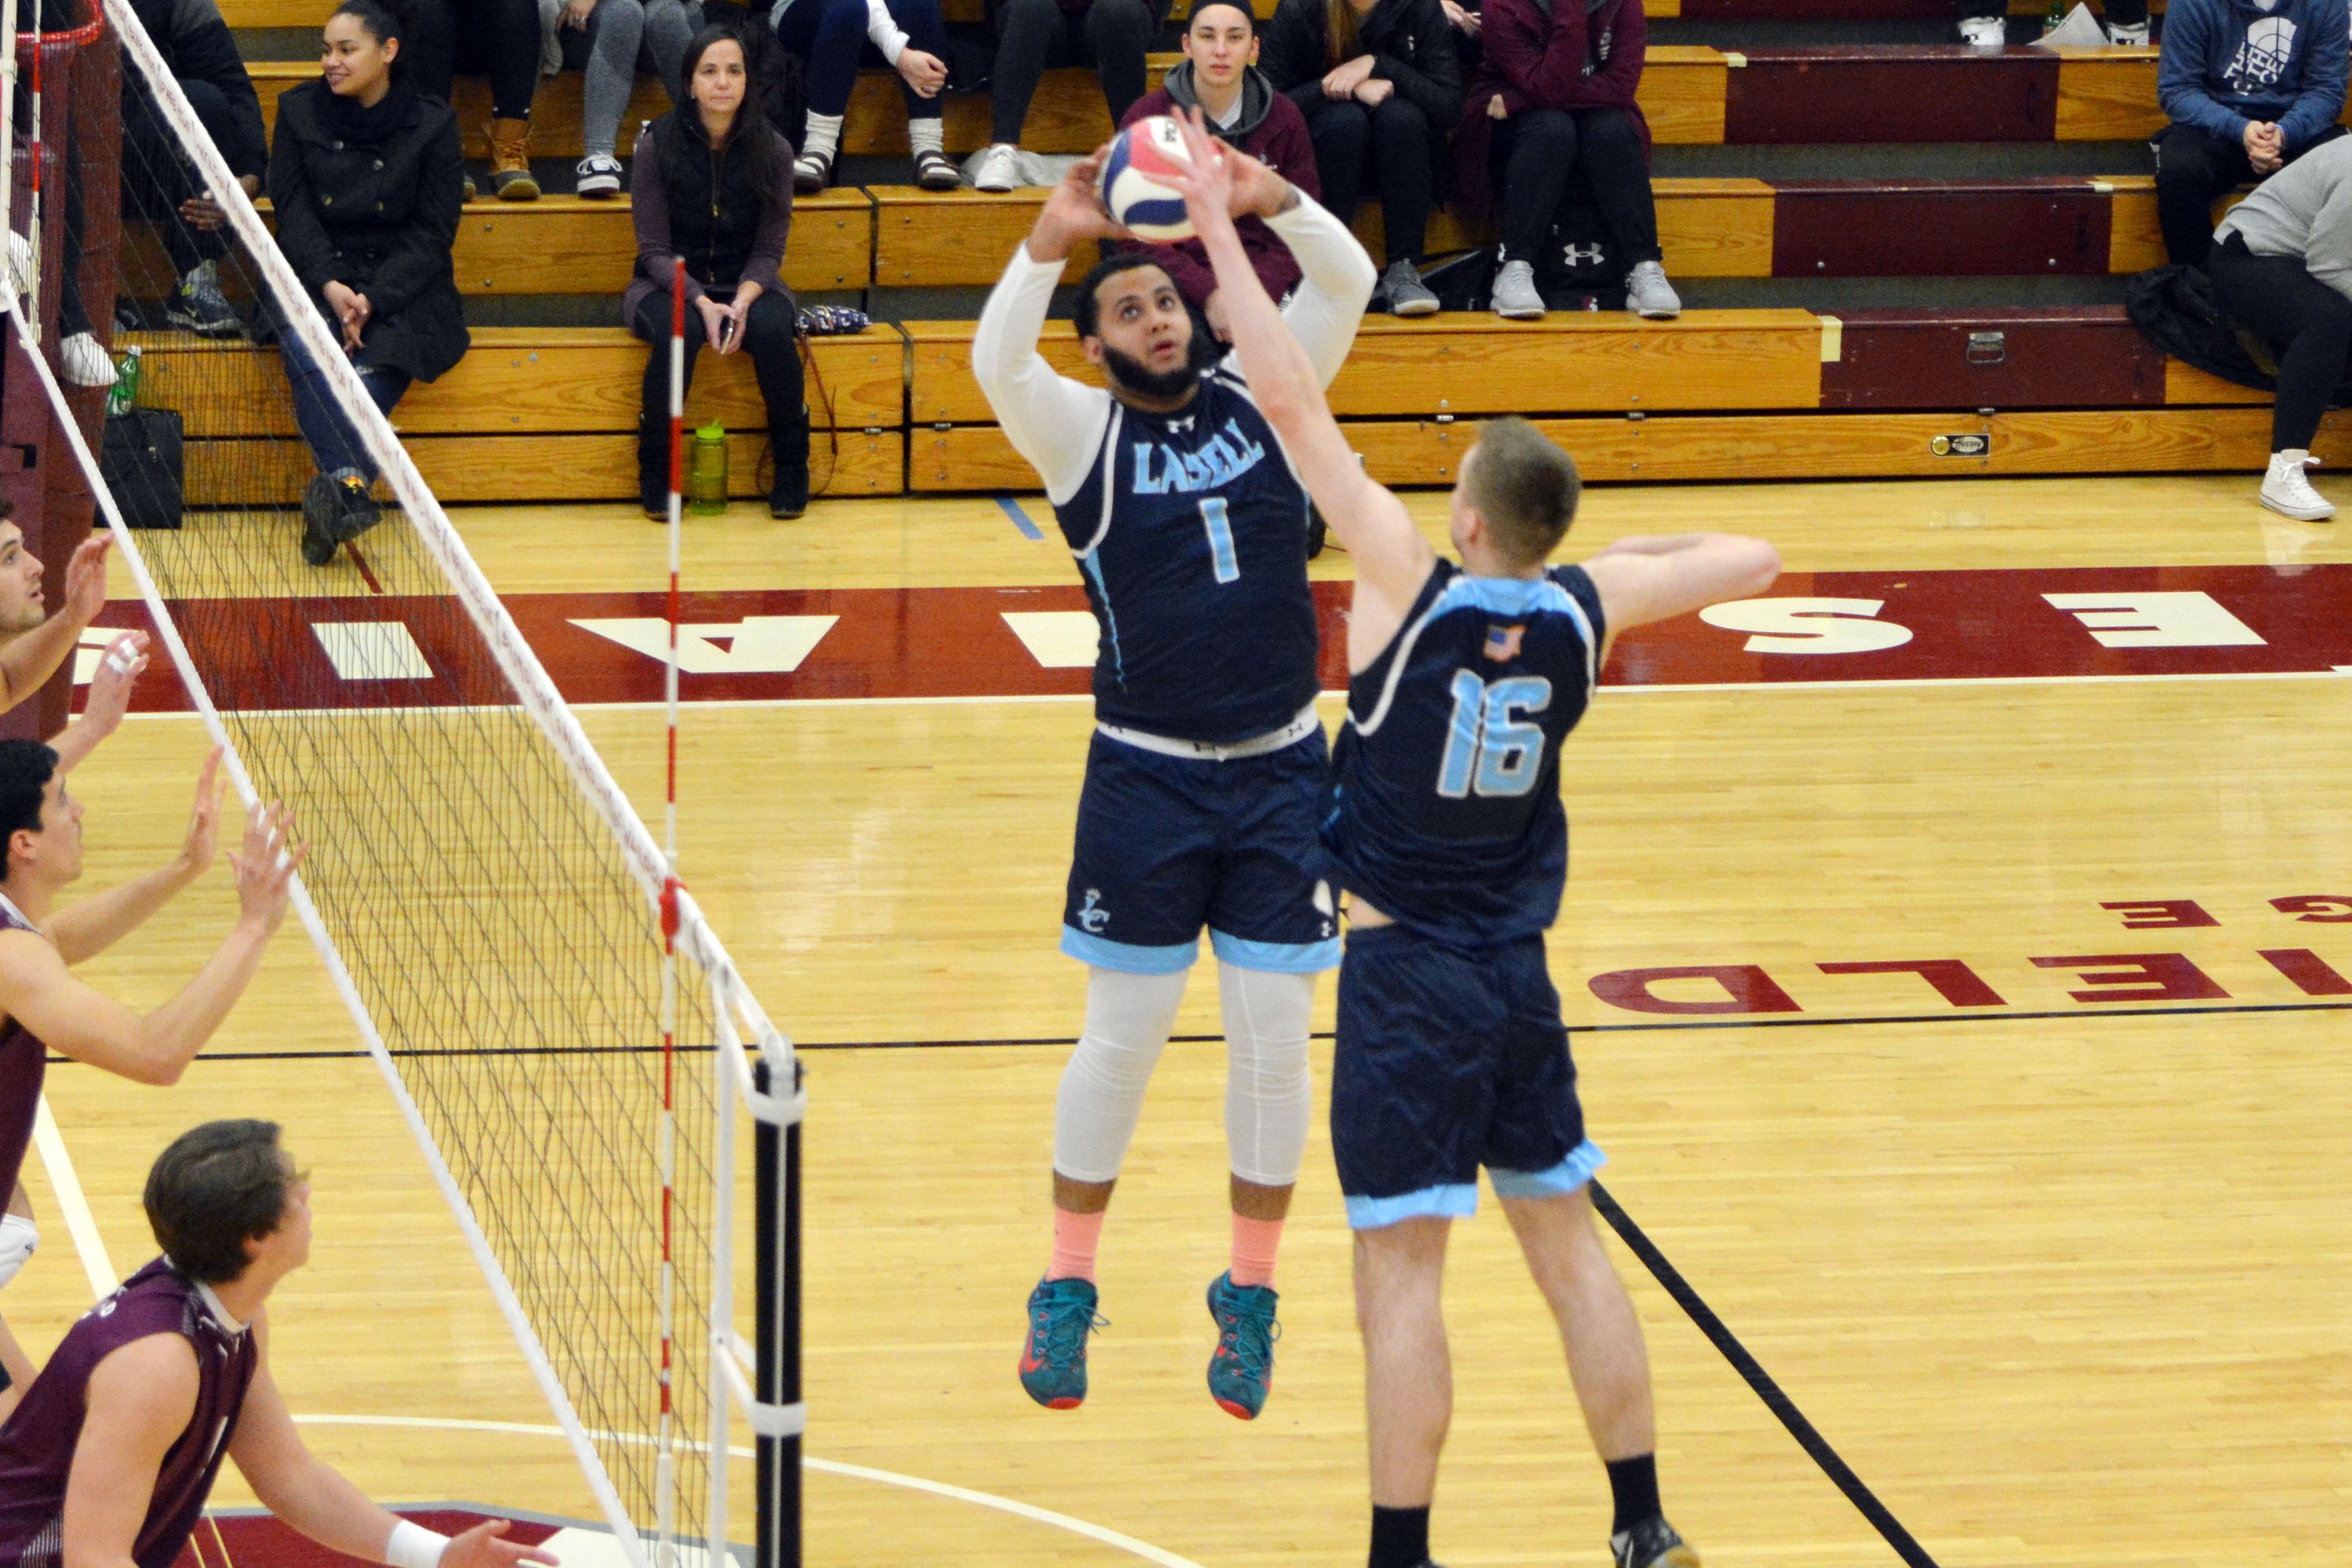 Lasell Men’s Volleyball outlasts Regis for first GNAC victory